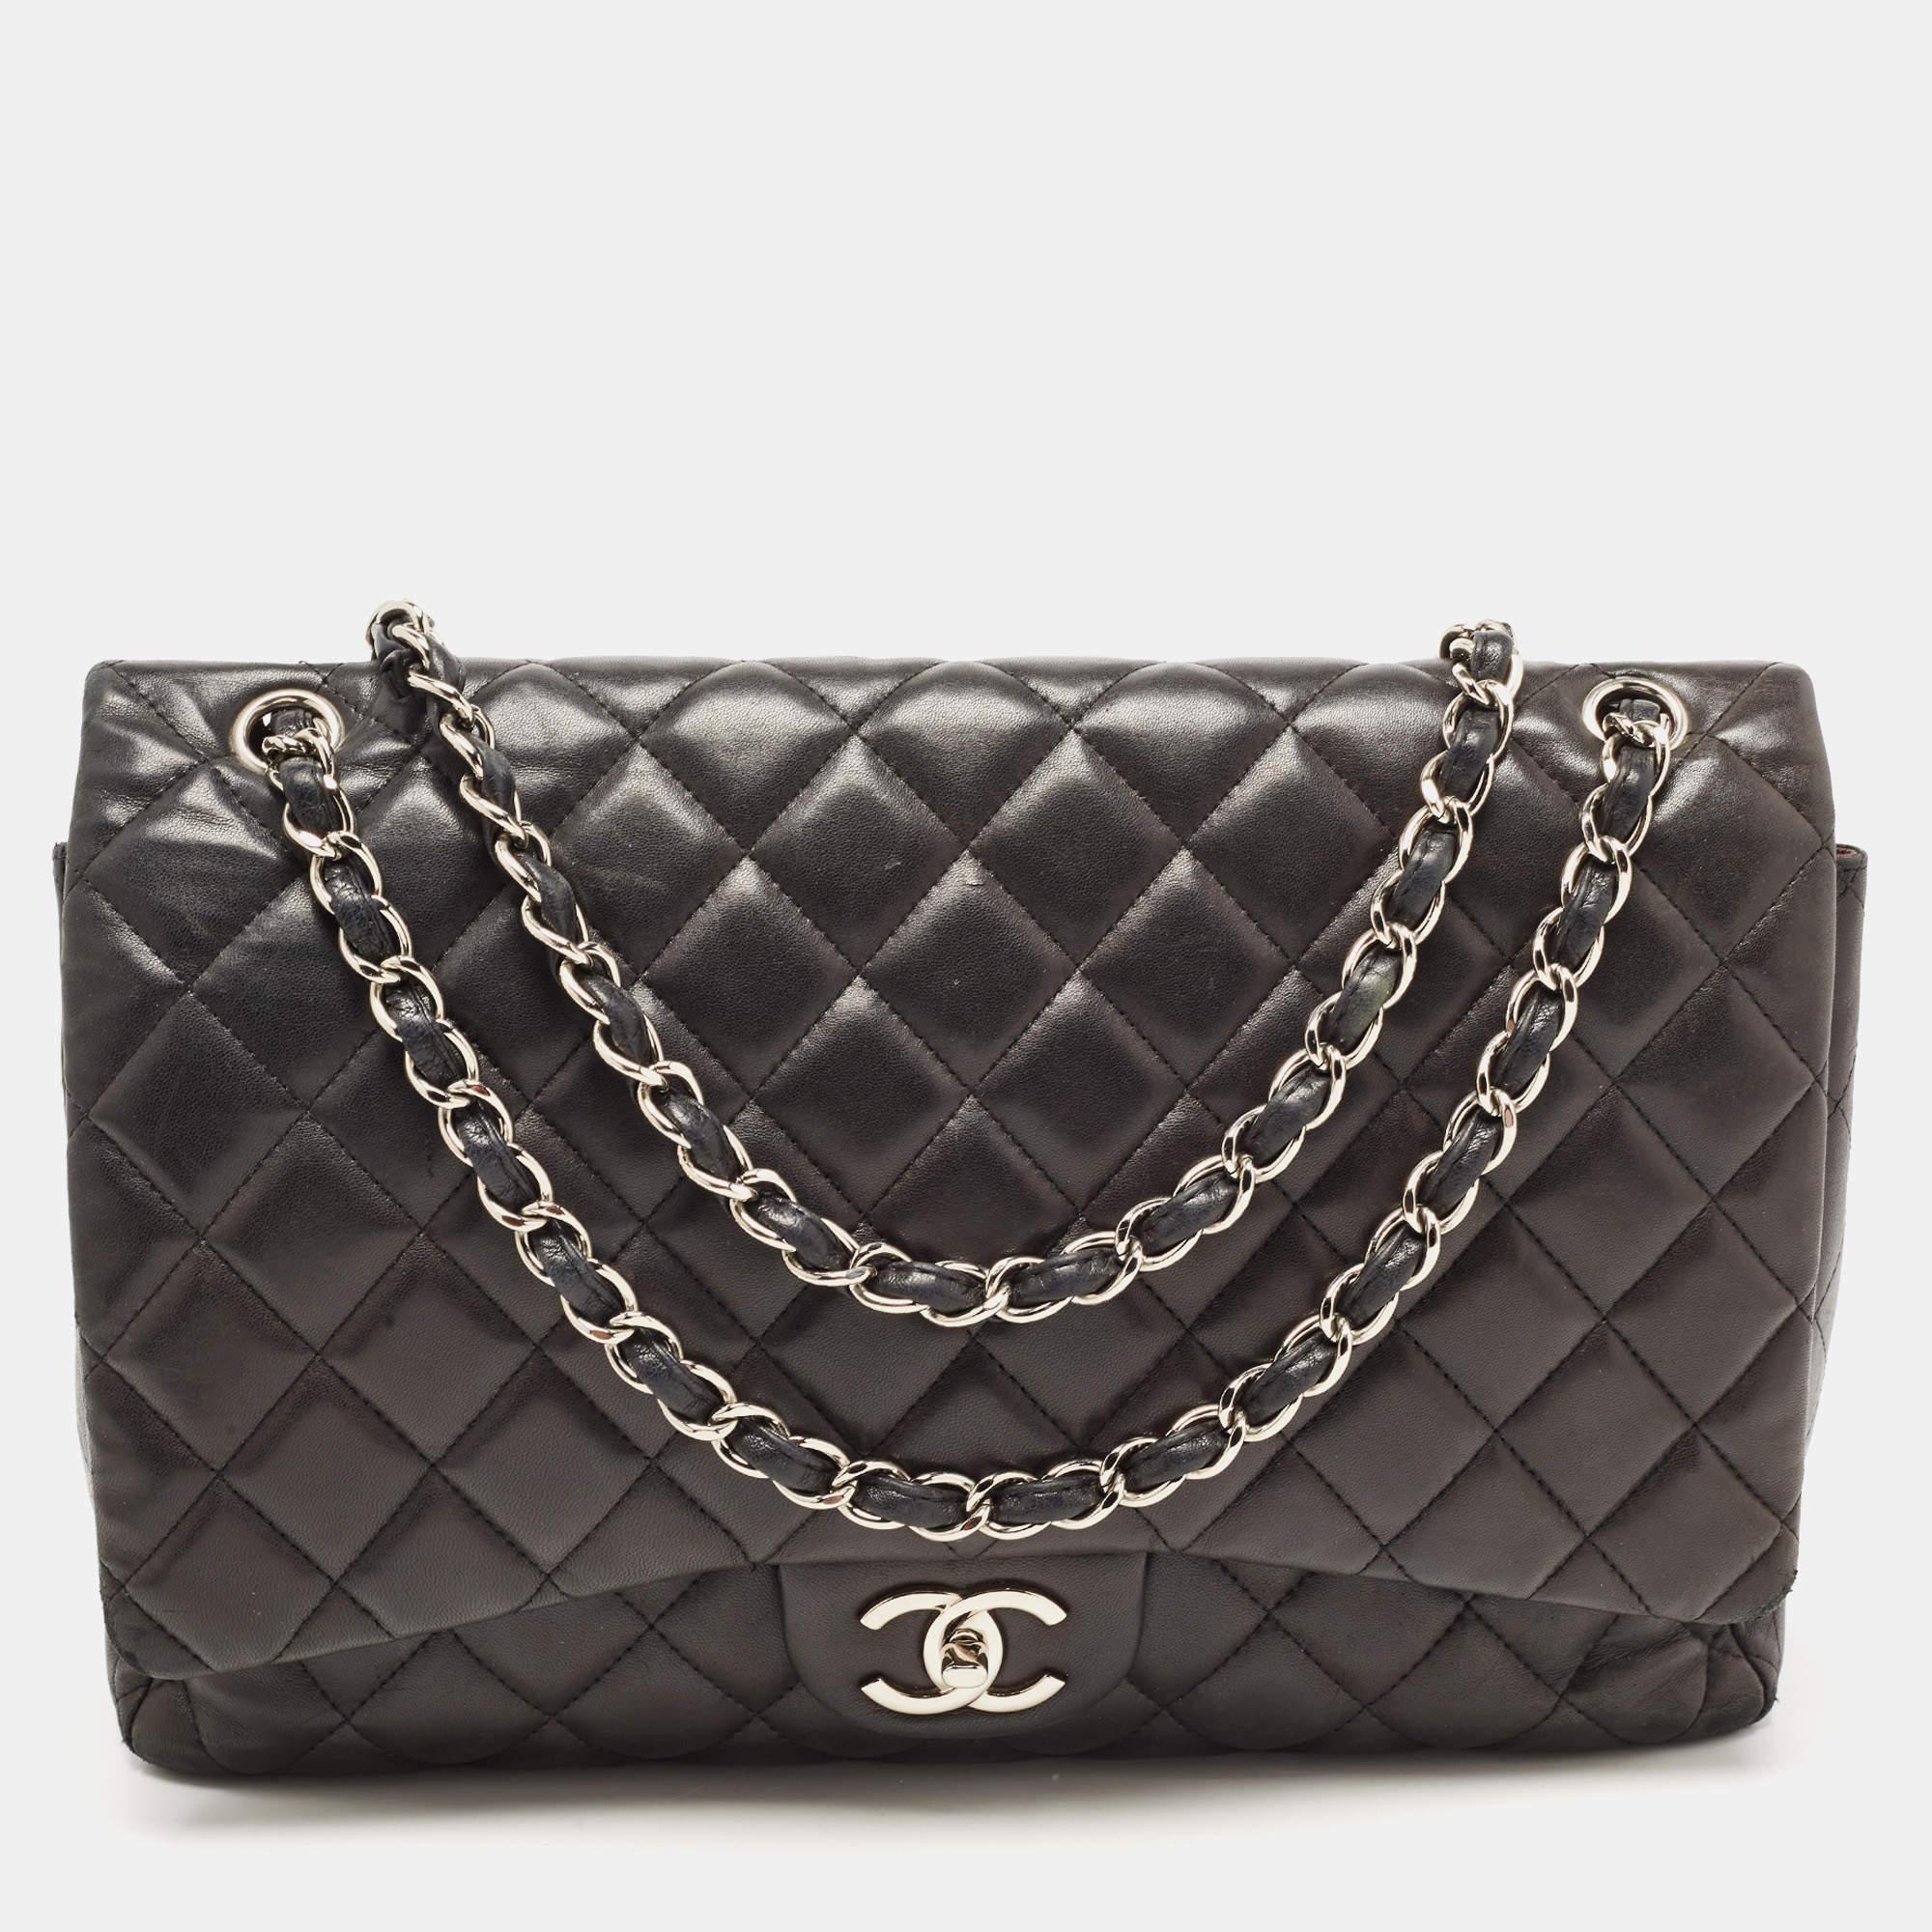 Women's Chanel Black Quilted Leather Maxi Classic Double Flap Bag For Sale